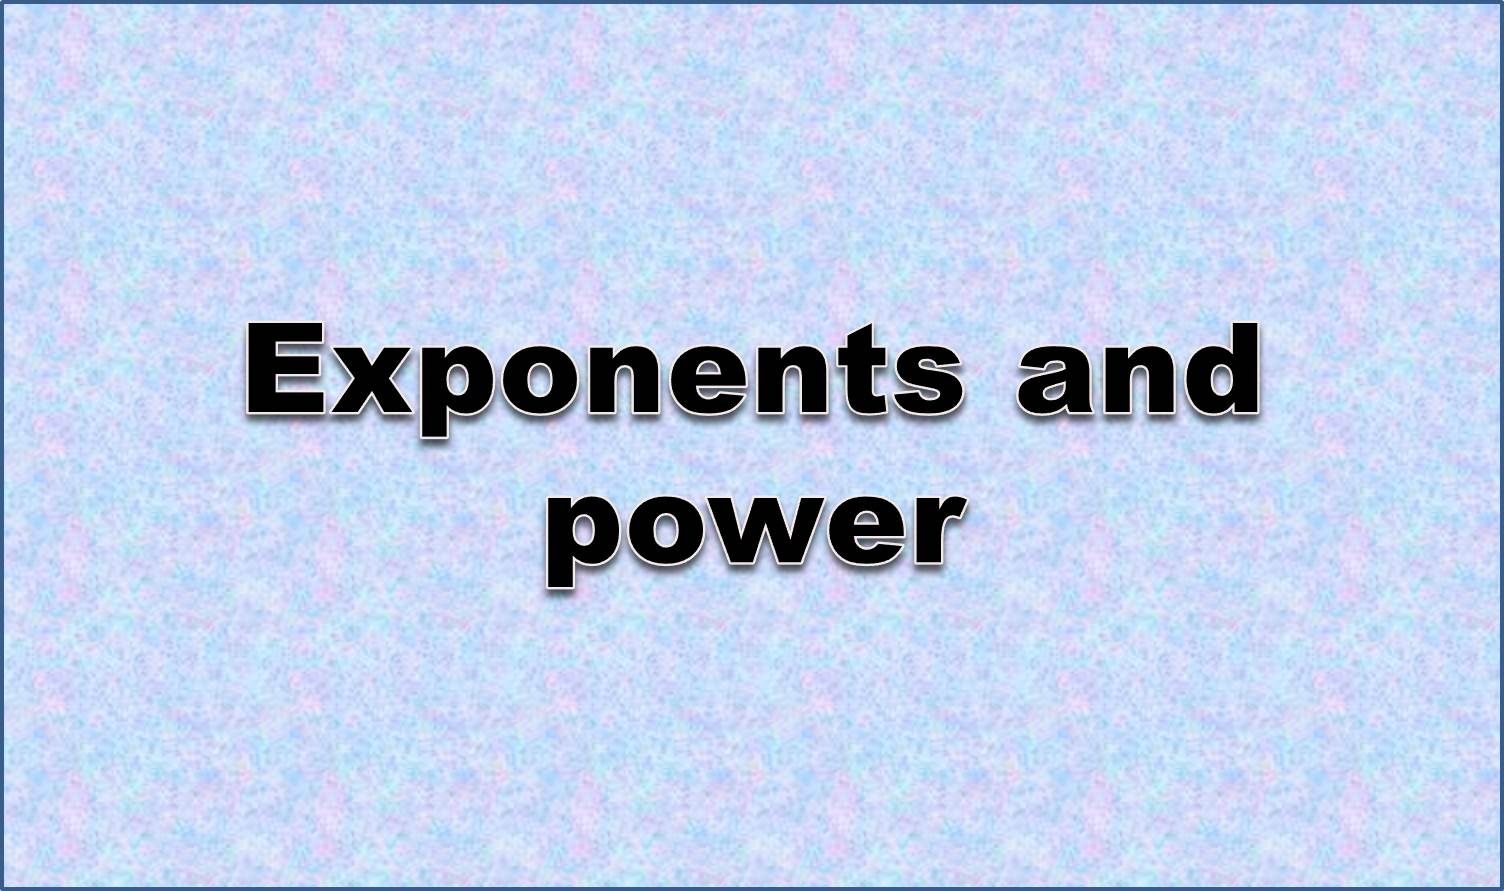 http://study.aisectonline.com/images/Exponents rule intro.jpg